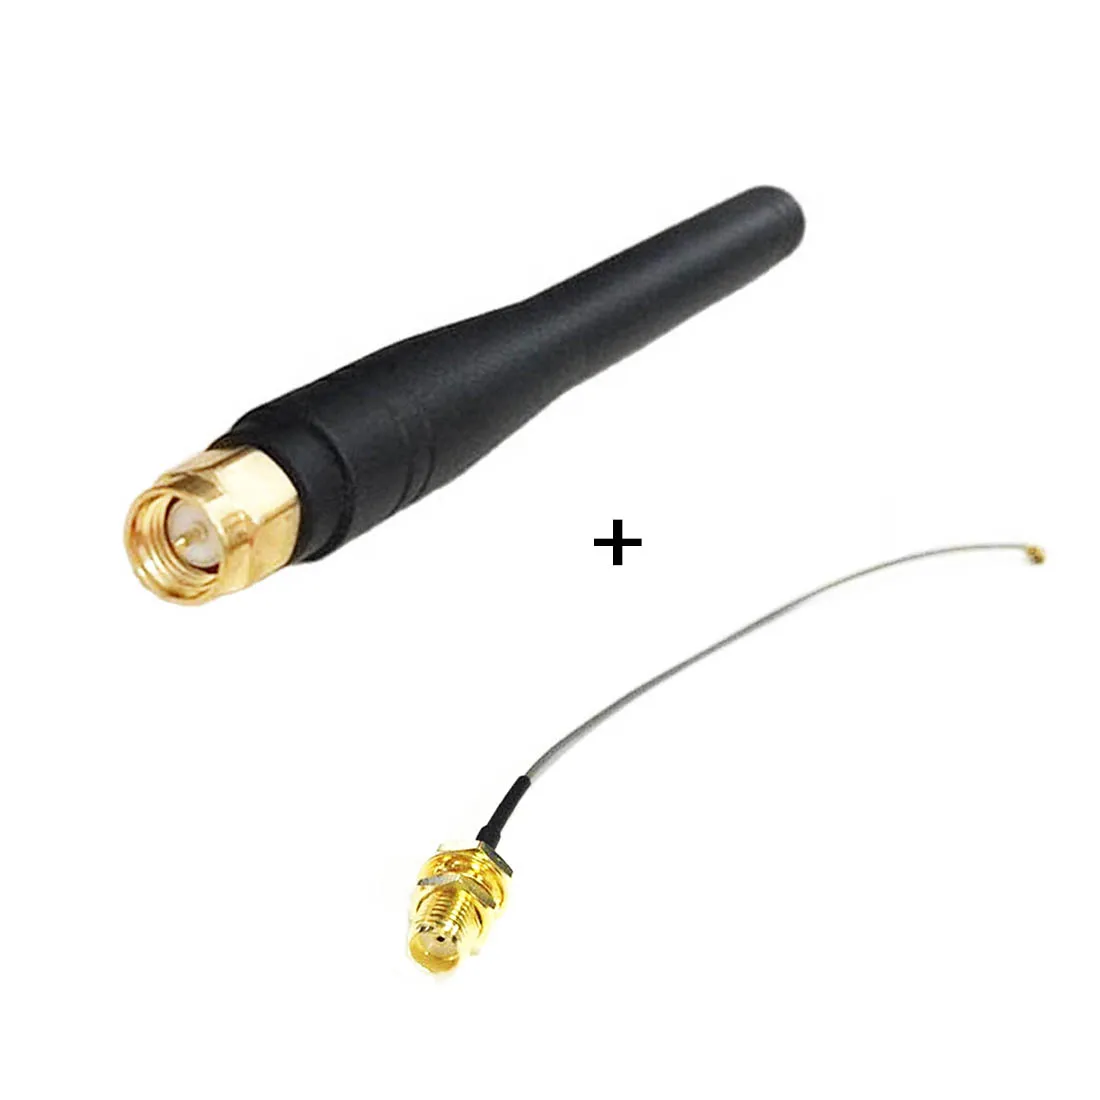 

3G Antennas 800/900/1800/1900/2100MHZ 3dBi GSM Aerial SMA Male Omni Aerials + IPX / u.fl To SMA Female Pigtail Cable 15cm